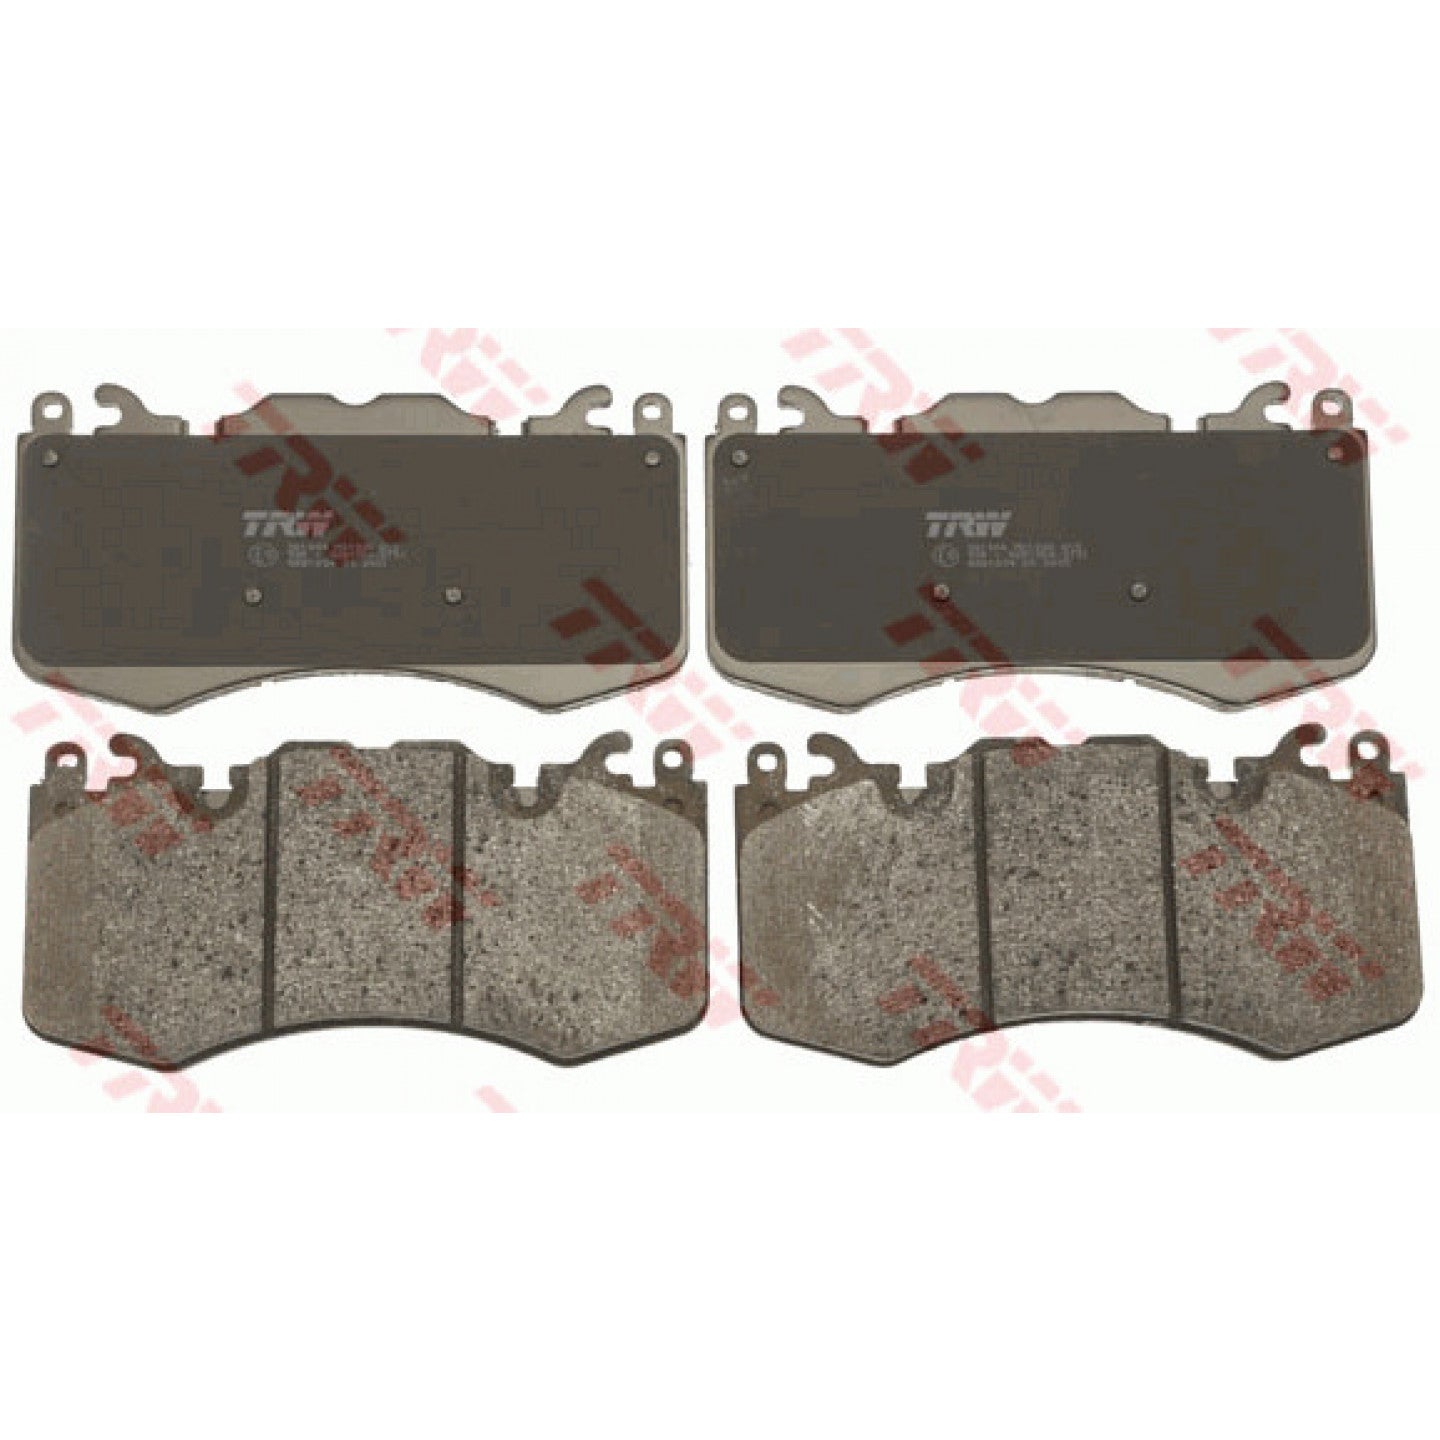 TRW FRONT BRAKE PADS GDB1834 for LAND ROVER DISCOVERY IV / RANGE ROVER III/IV/SPORT I/II - aspiremotorsport